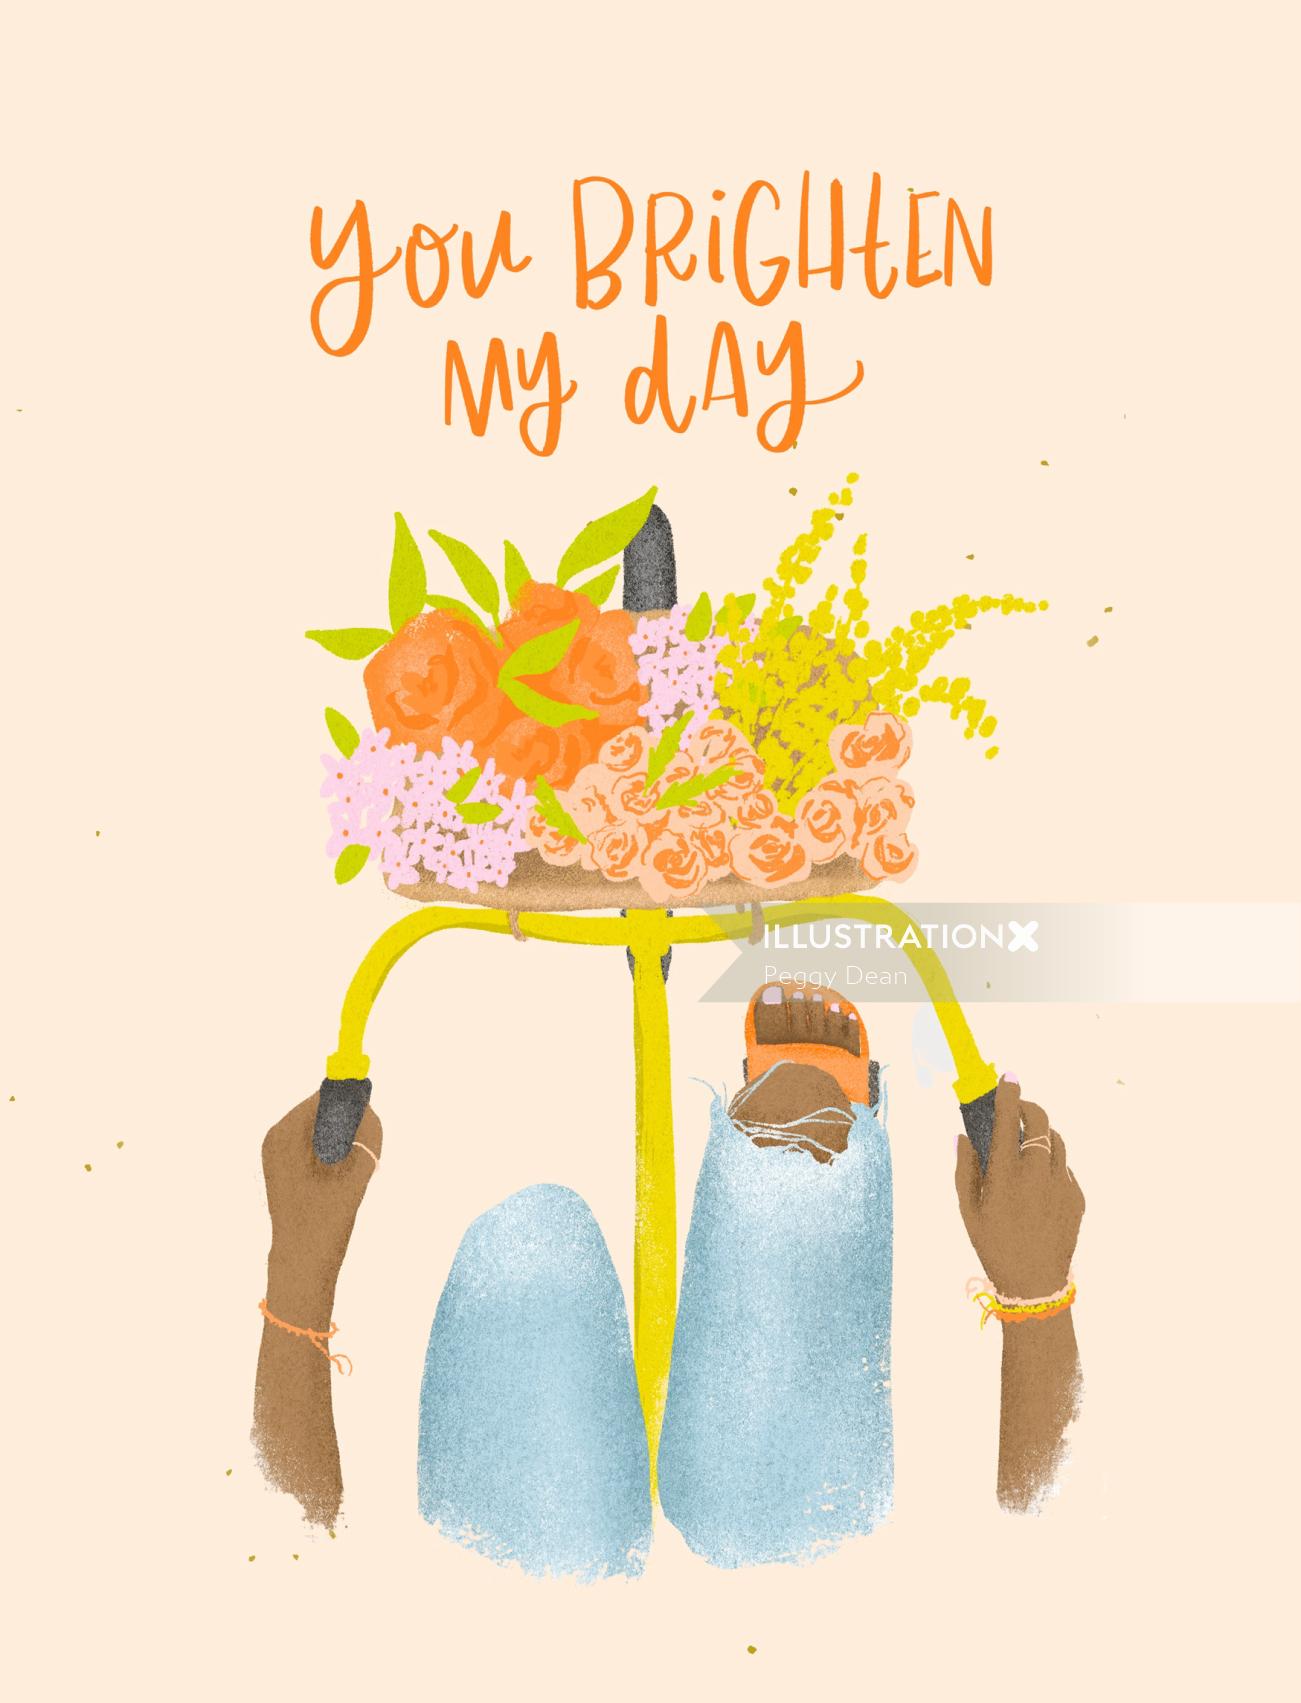 Graphic You brighten my day